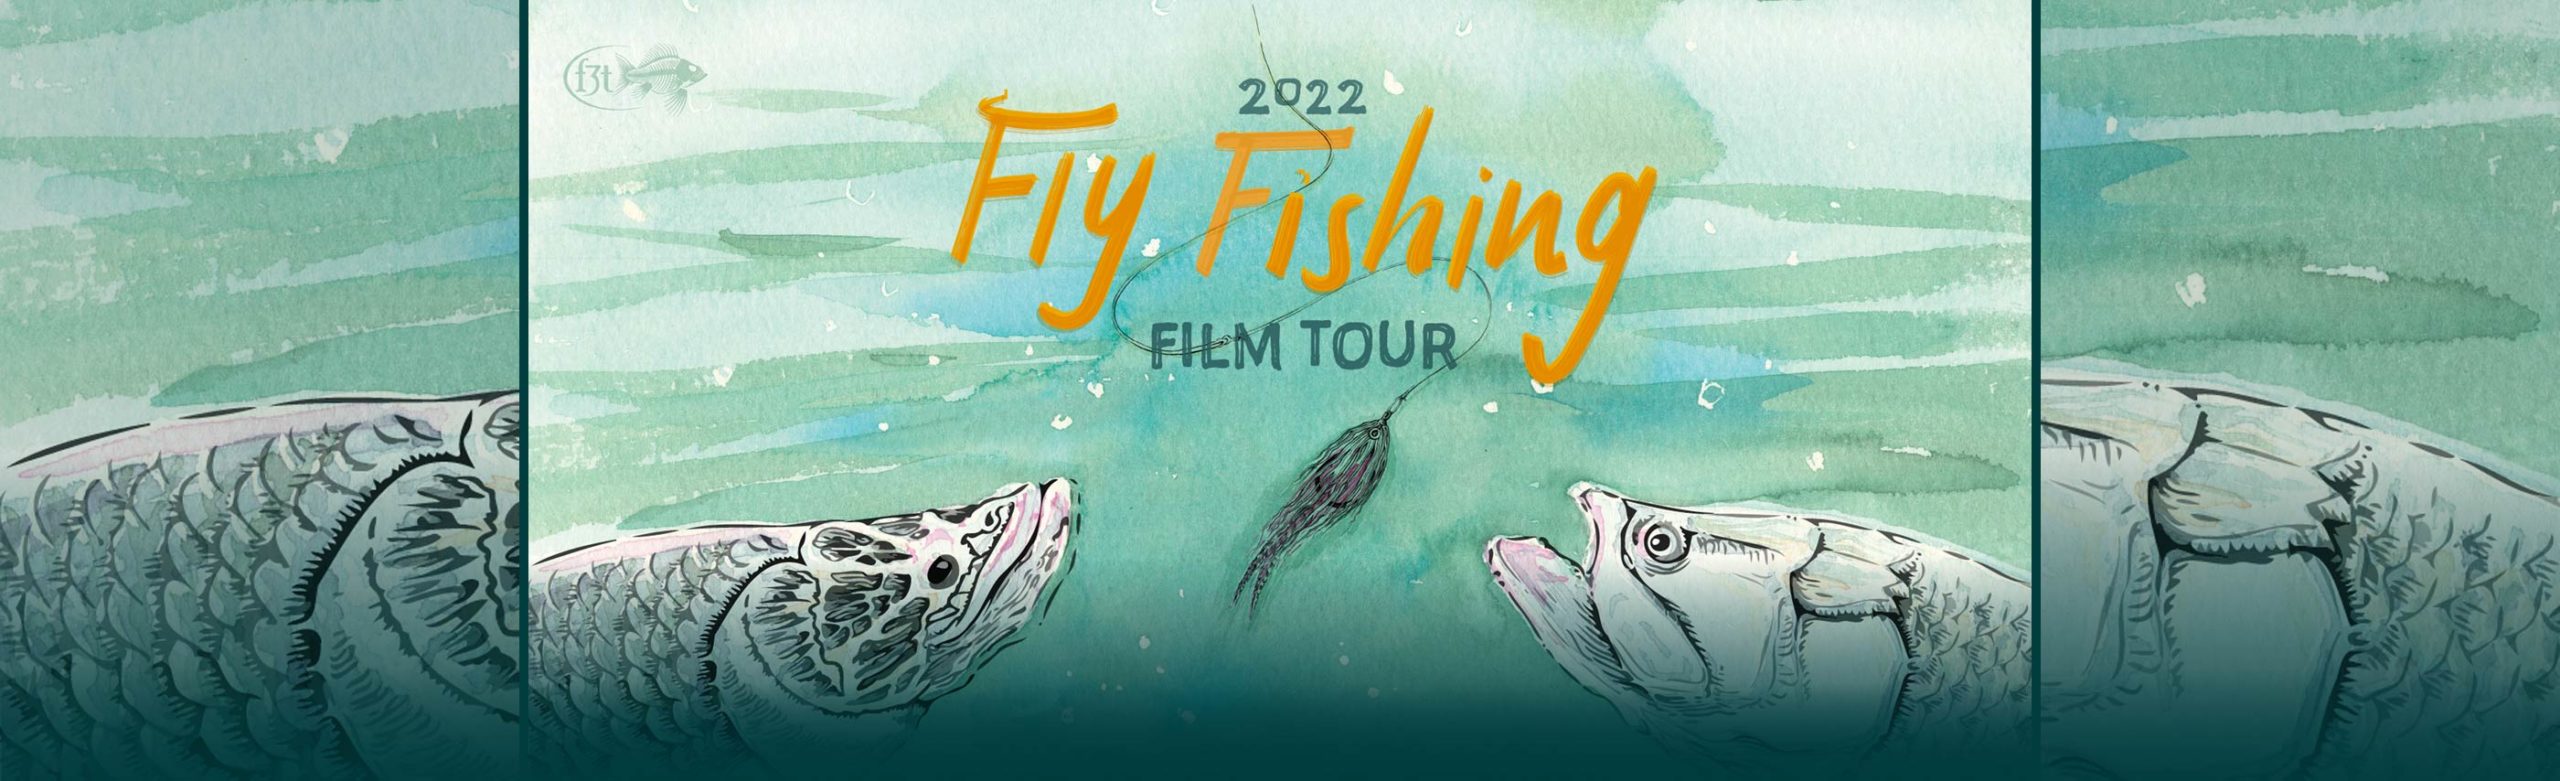 Event Info: Fly Fishing Film Tour at The Wilma 2022 Image